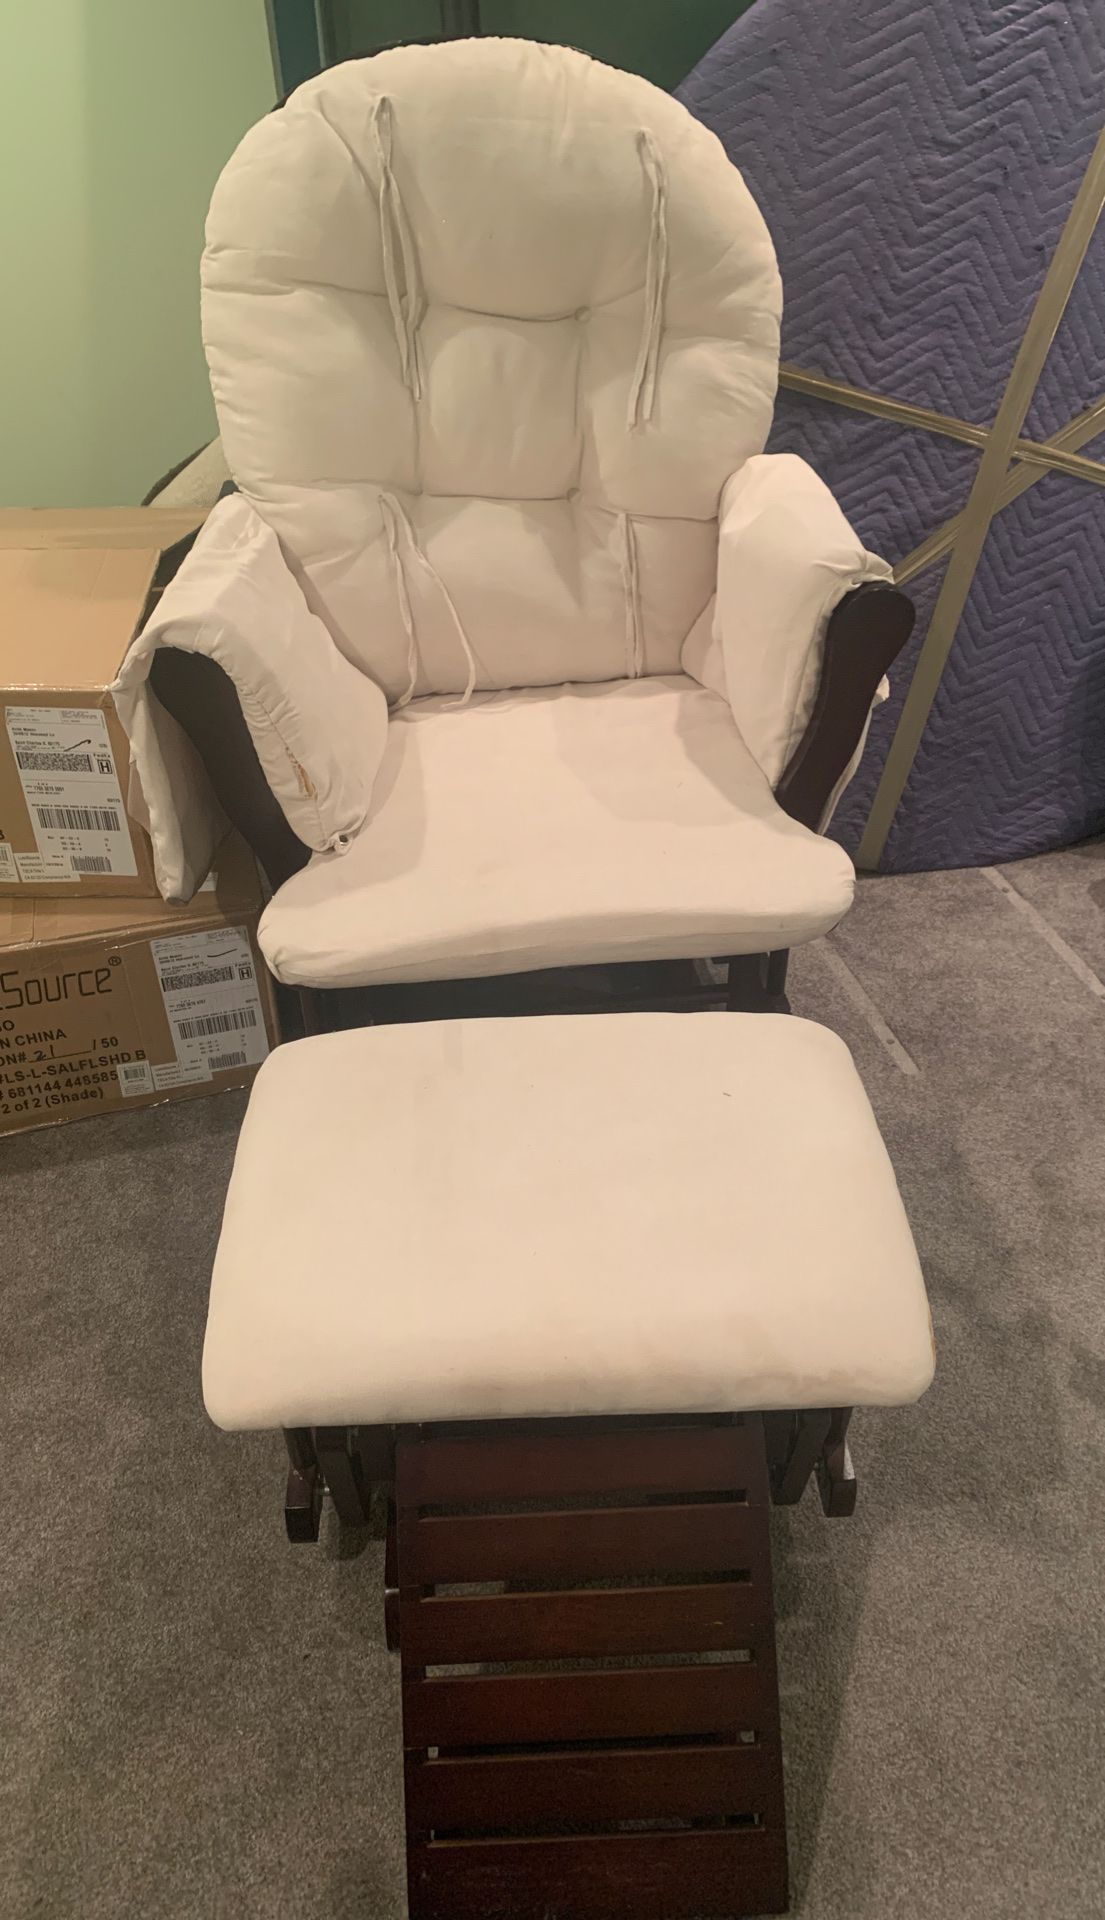 Wooden Rocking chair with foot rest white cushions.